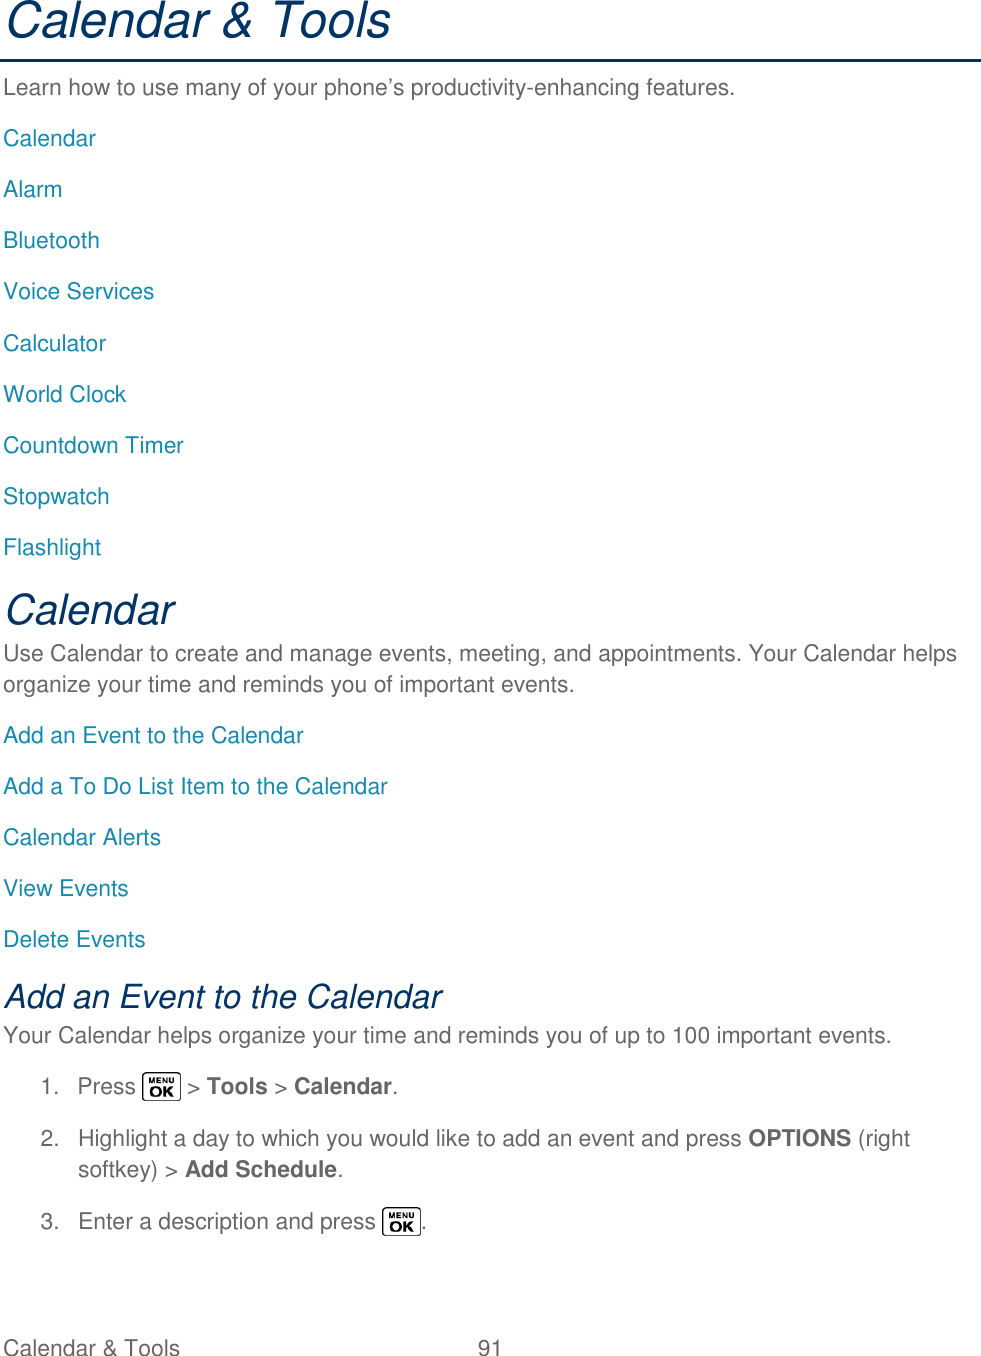  Calendar &amp; Tools  91   Calendar &amp; Tools Learn how to use many of your phone‘s productivity-enhancing features. Calendar Alarm Bluetooth Voice Services Calculator World Clock Countdown Timer Stopwatch Flashlight Calendar Use Calendar to create and manage events, meeting, and appointments. Your Calendar helps organize your time and reminds you of important events. Add an Event to the Calendar Add a To Do List Item to the Calendar Calendar Alerts View Events Delete Events Add an Event to the Calendar Your Calendar helps organize your time and reminds you of up to 100 important events. 1.  Press   &gt; Tools &gt; Calendar. 2.  Highlight a day to which you would like to add an event and press OPTIONS (right softkey) &gt; Add Schedule. 3.  Enter a description and press  . 